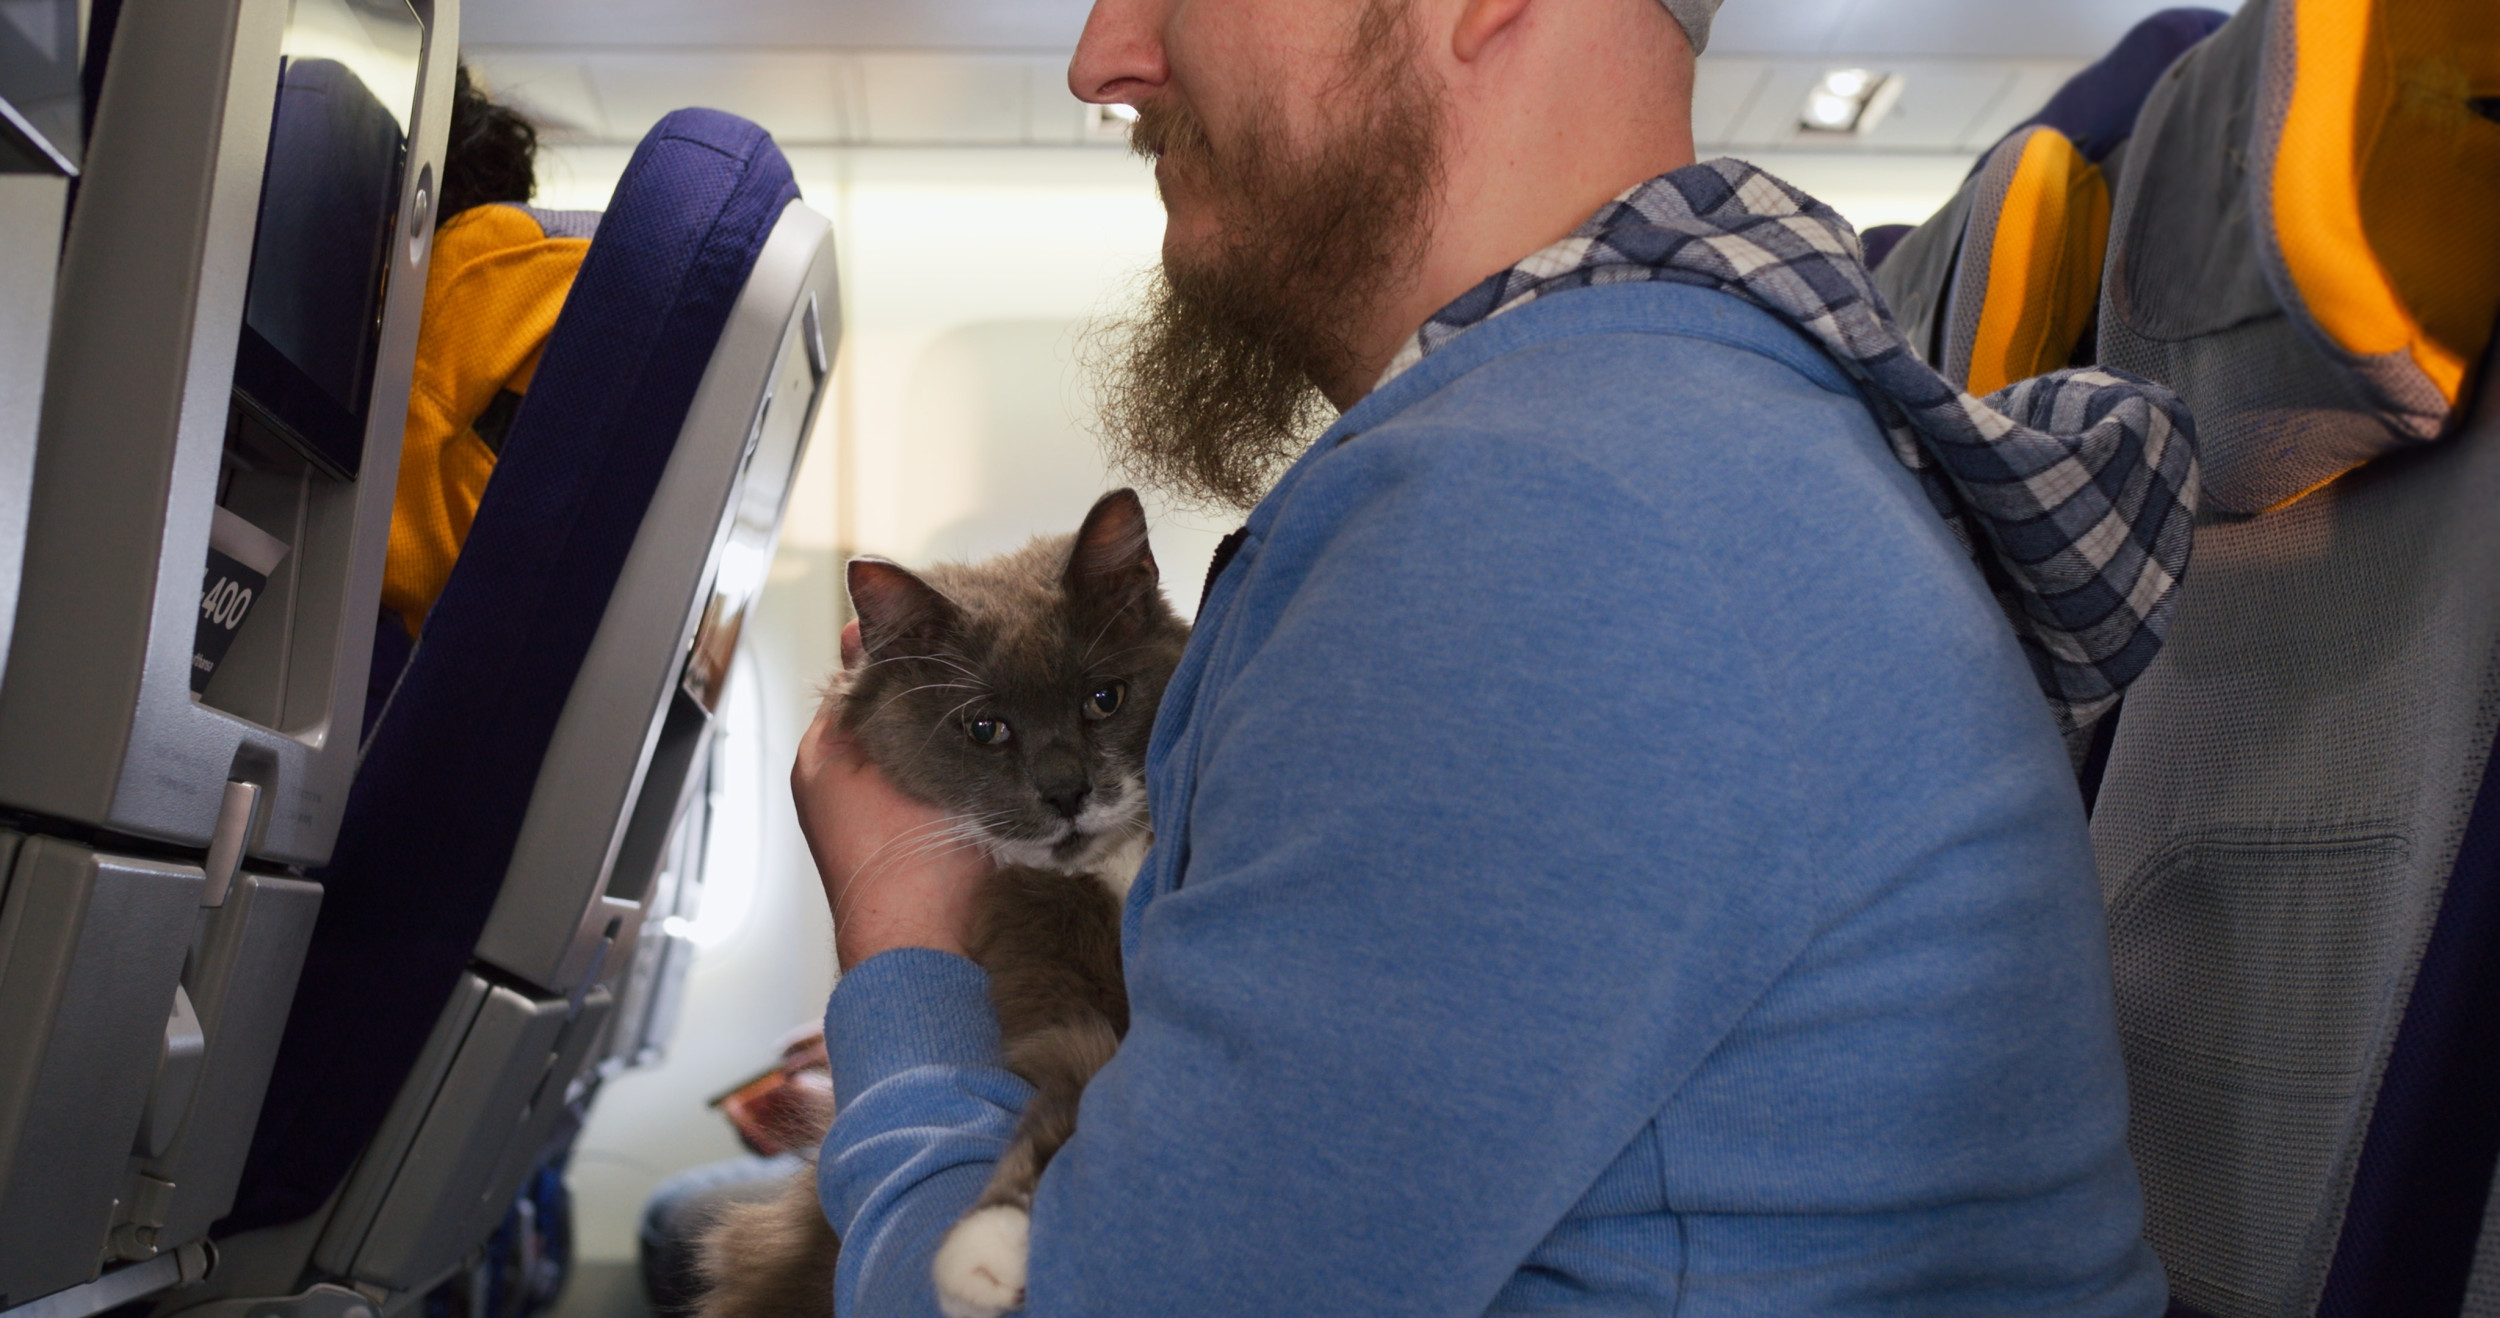 Passenger brings cats to airport, the security gate experience is priceless